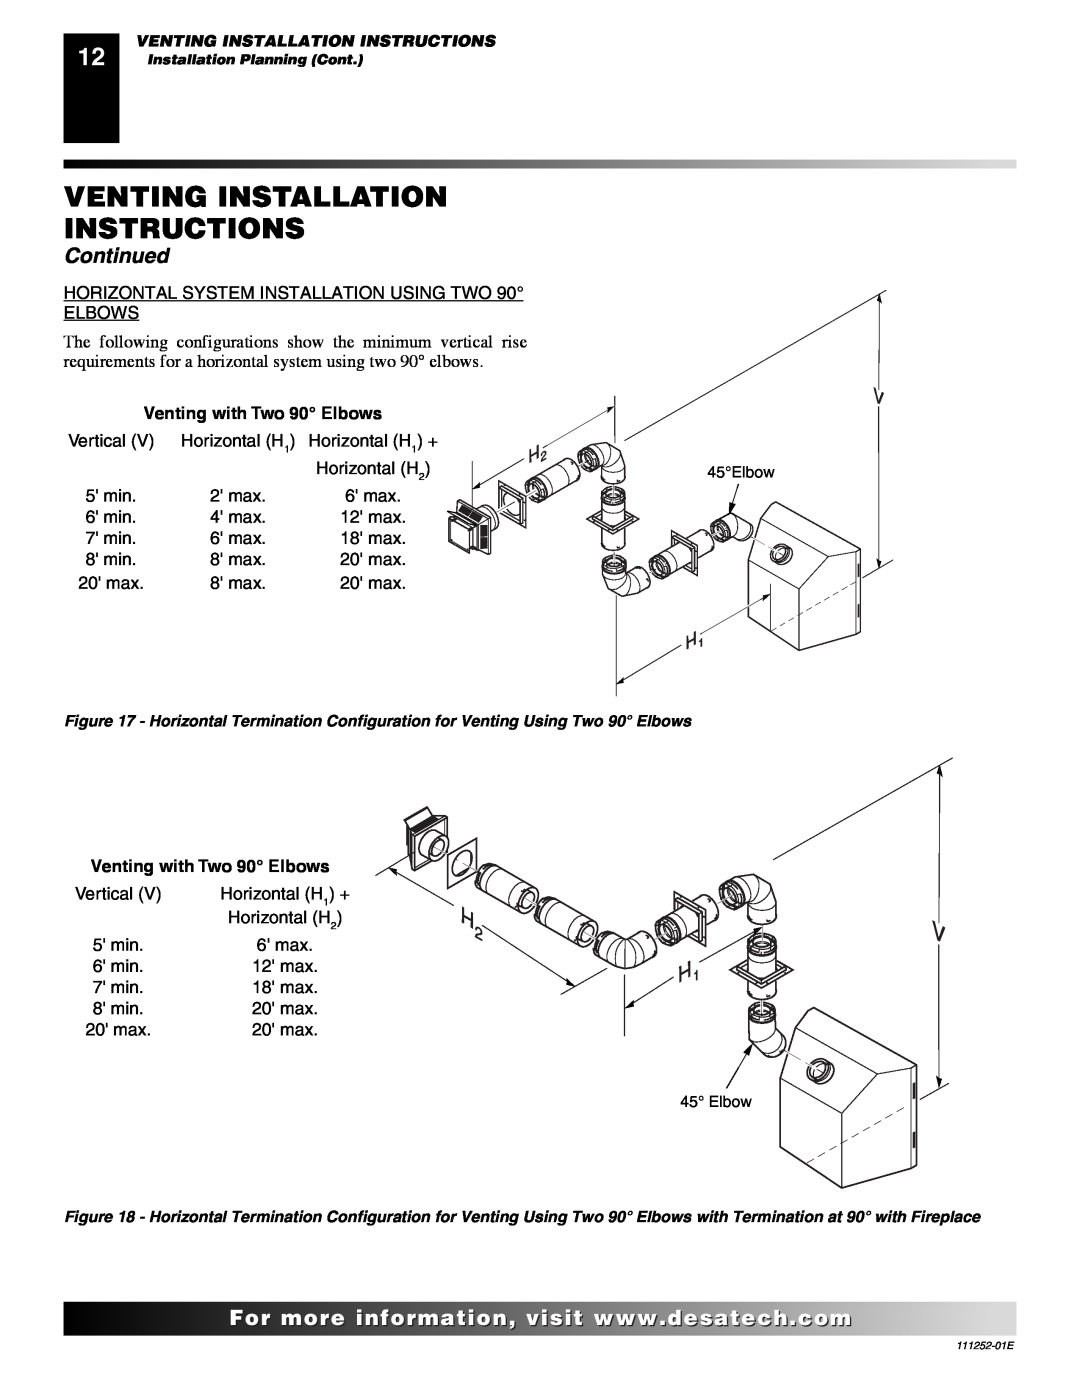 Desa CHDV36NR-C, (V)V36P-B SERIES, VV36PC1 SERIES Venting Installation Instructions, Continued, Venting with Two 90 Elbows 